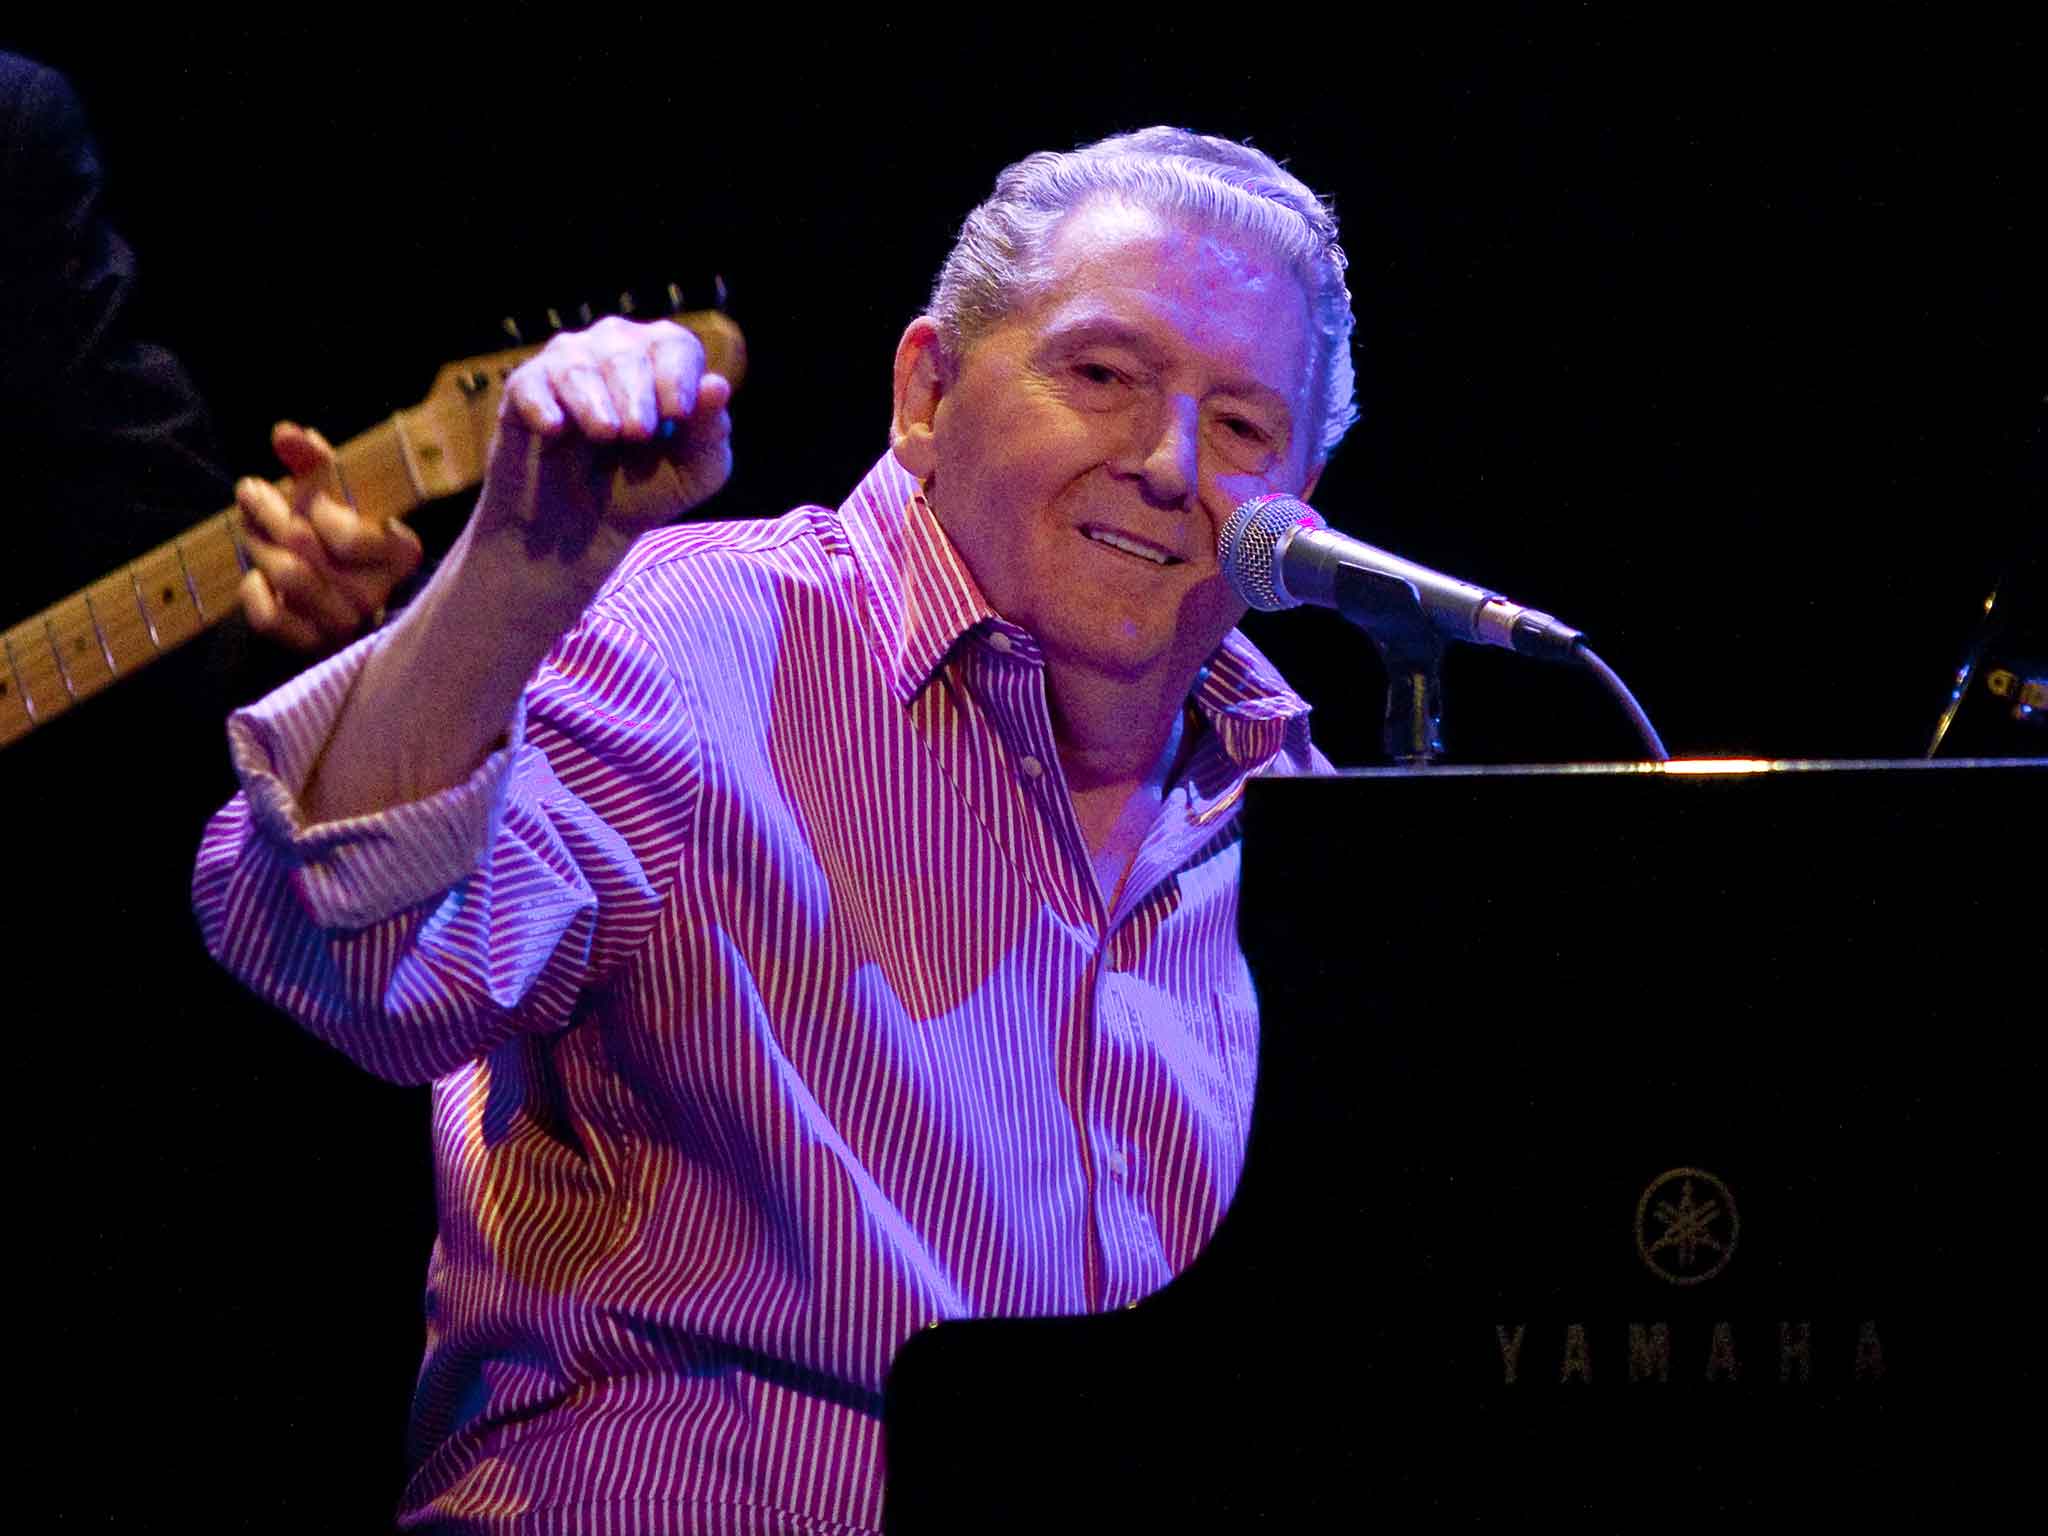 Jerry Lee Lewis's British concerts are being billed as his 80th Birthday Farewell UK Tour